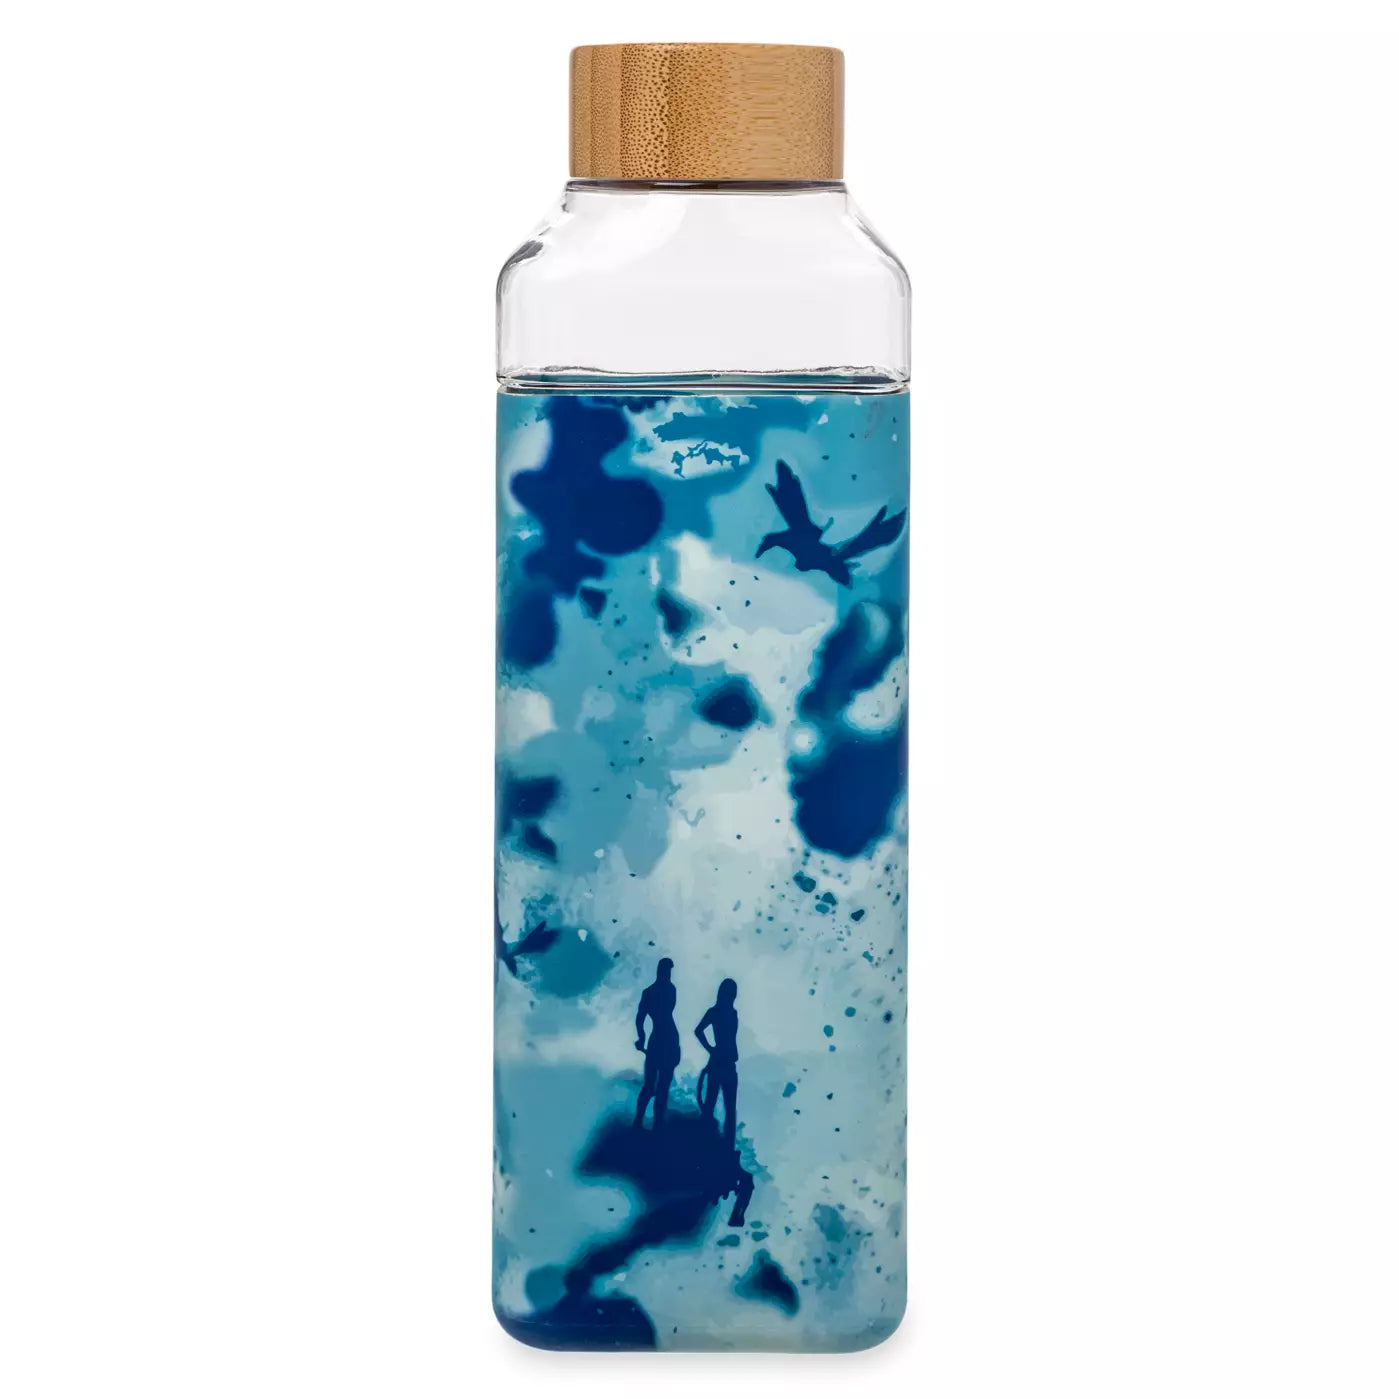 Disney Store Avatar: The Way of Water Water Bottle